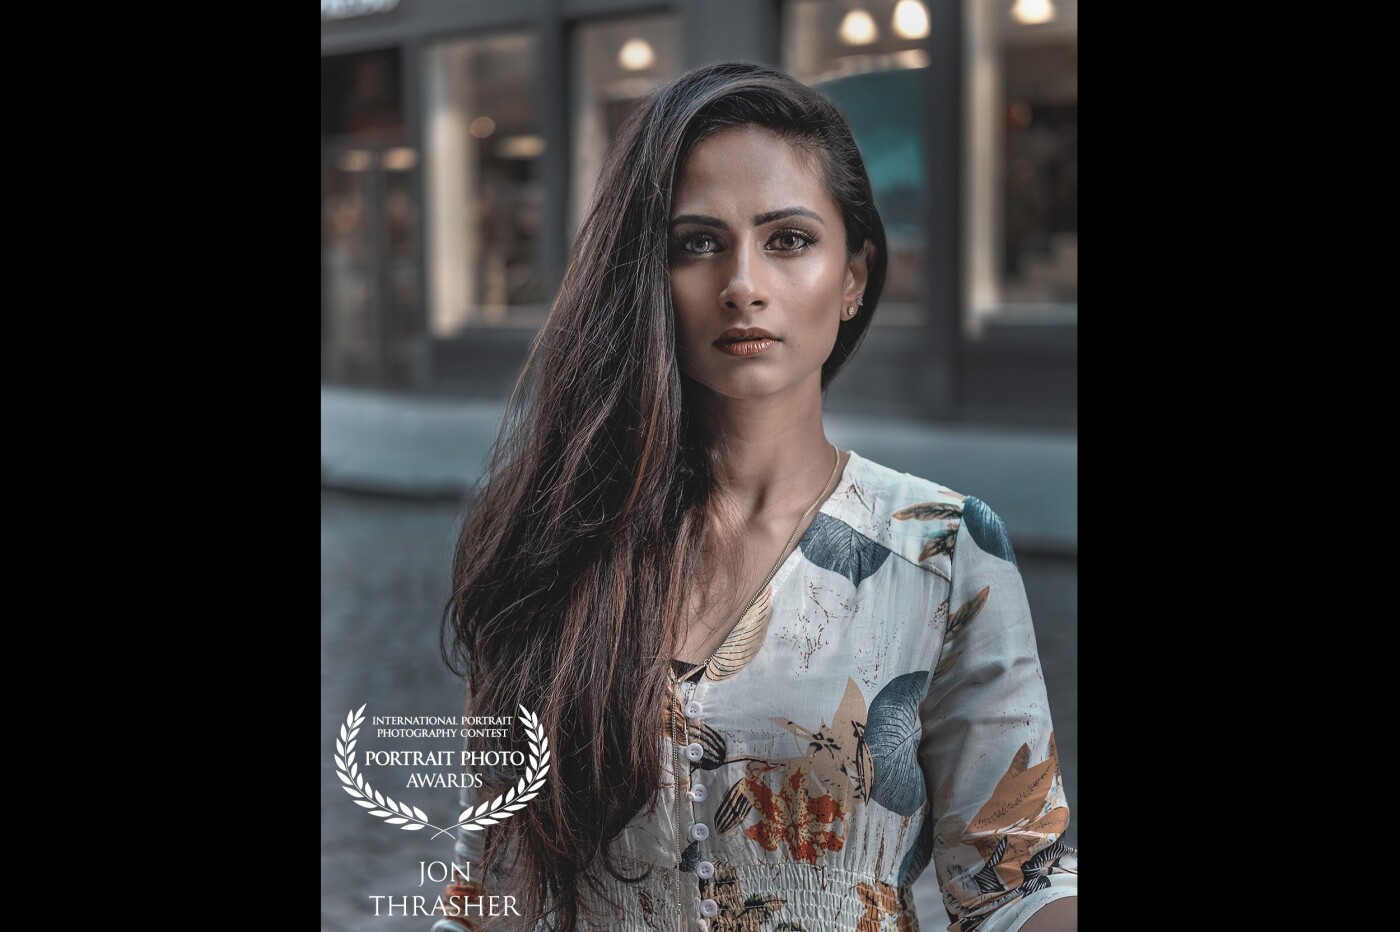 This was shot in SoHo neighbourhood in NYC late on a July afternoon, in all-natural light. The model is Nausheen Ahmed, and LA-based model/actor with whom I have worked several times since this shoot. However, this was my first time working with Nausheen, and images from this shoot are still among my favourite of all of my photos. Nausheen is on Instagram as @nausheen_ahmed.